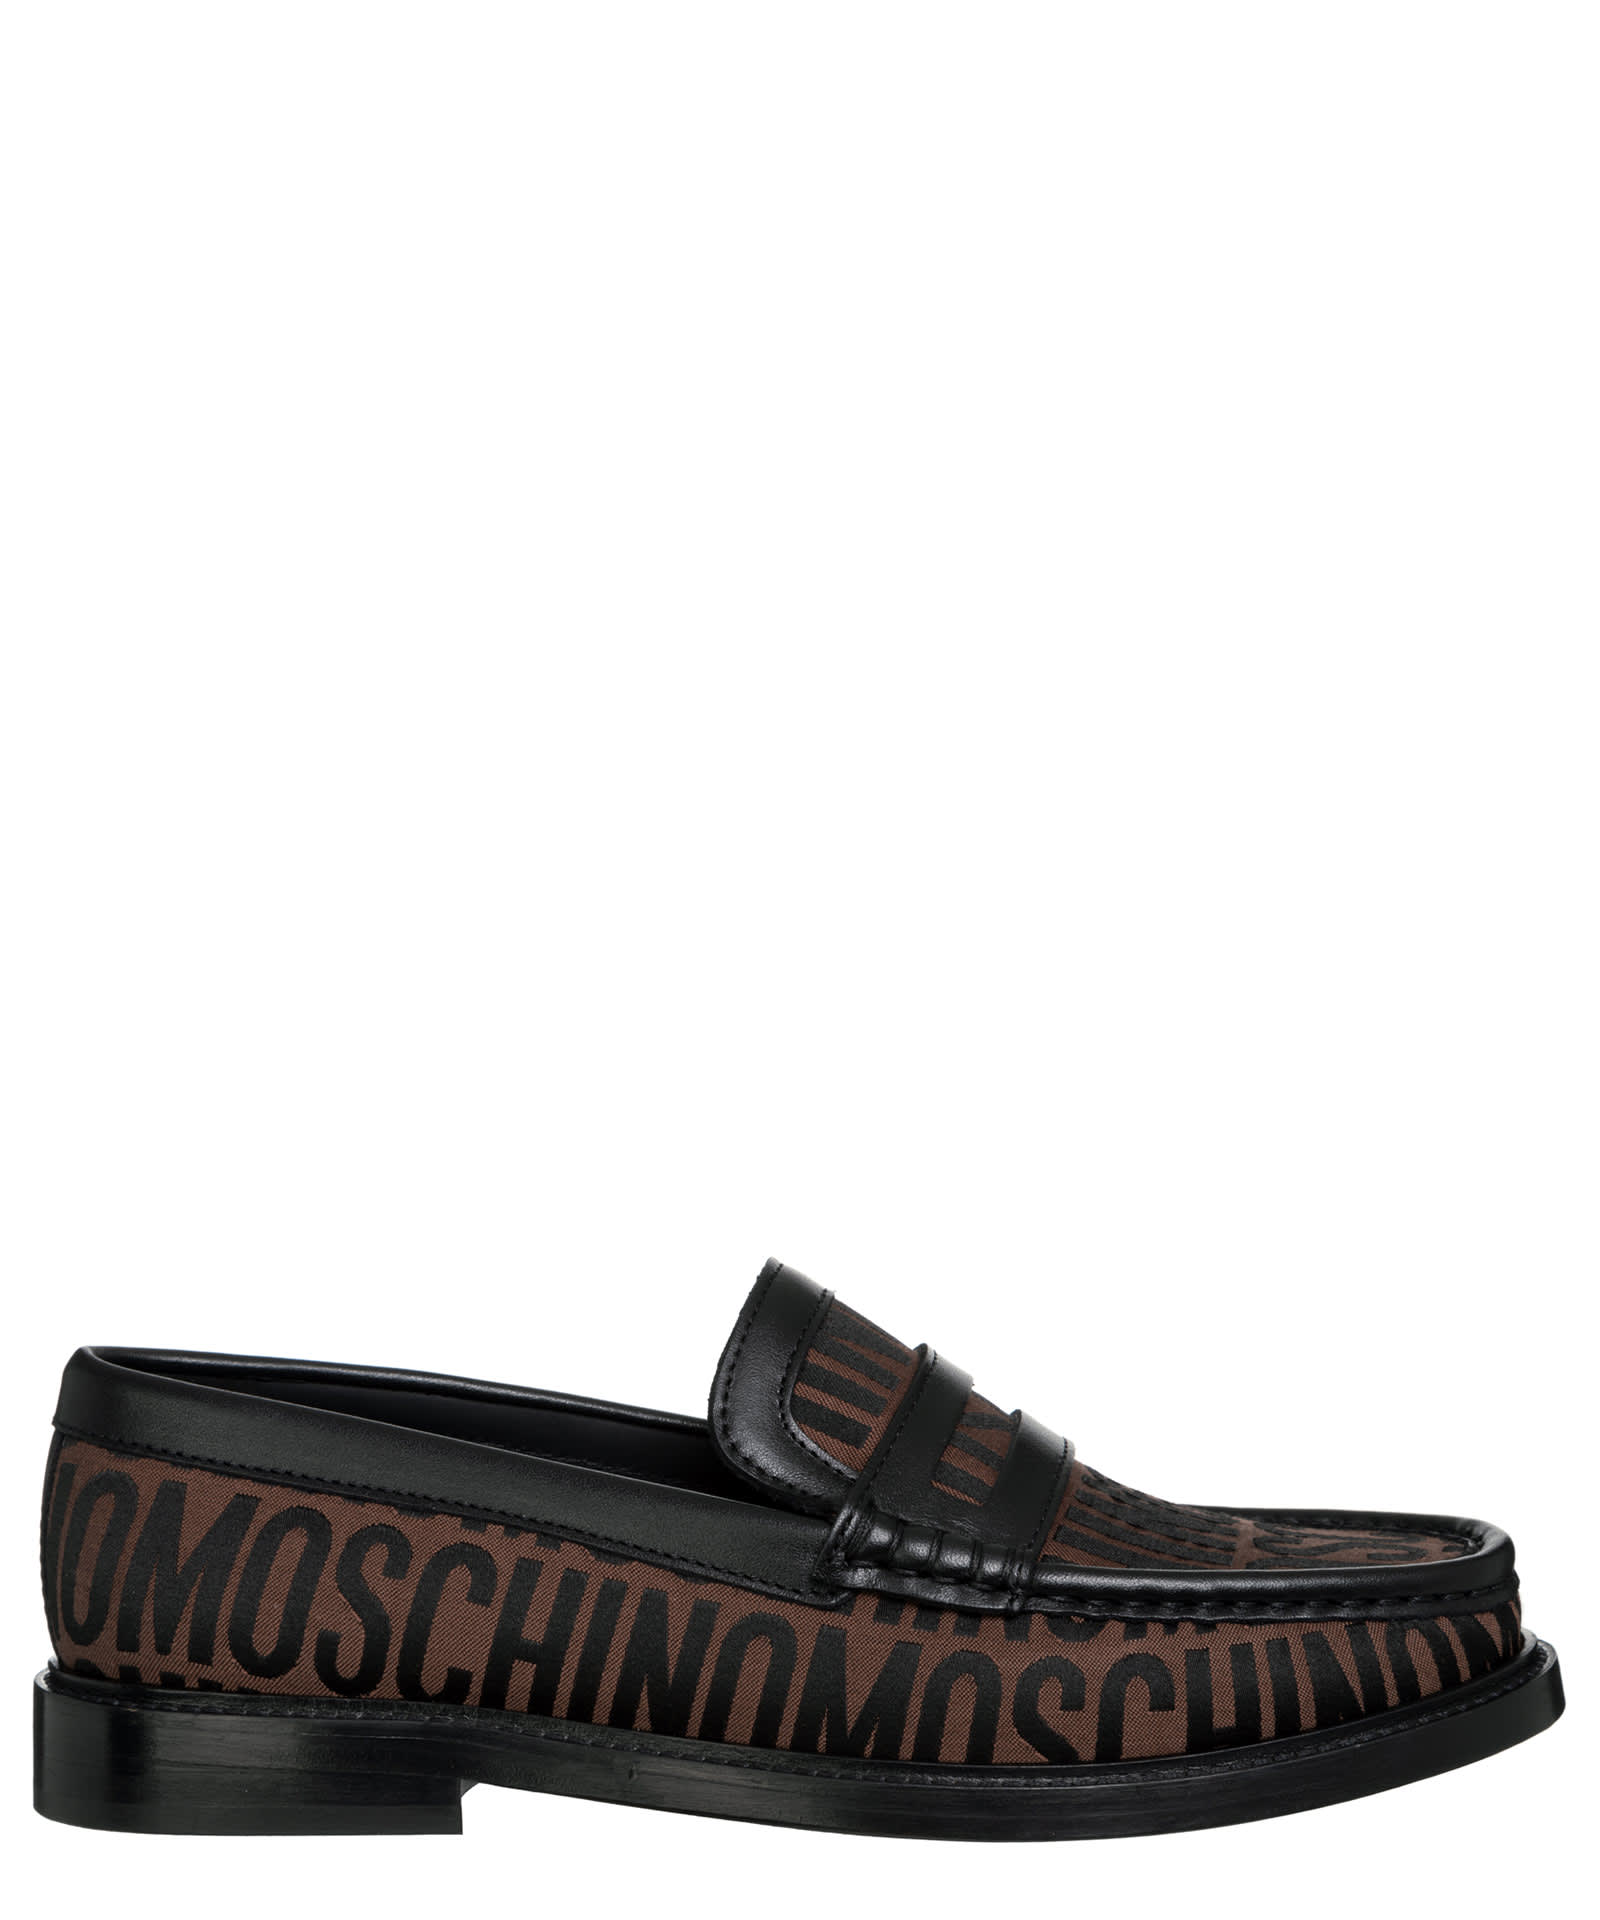 MOSCHINO LOGO LEATHER LOAFERS